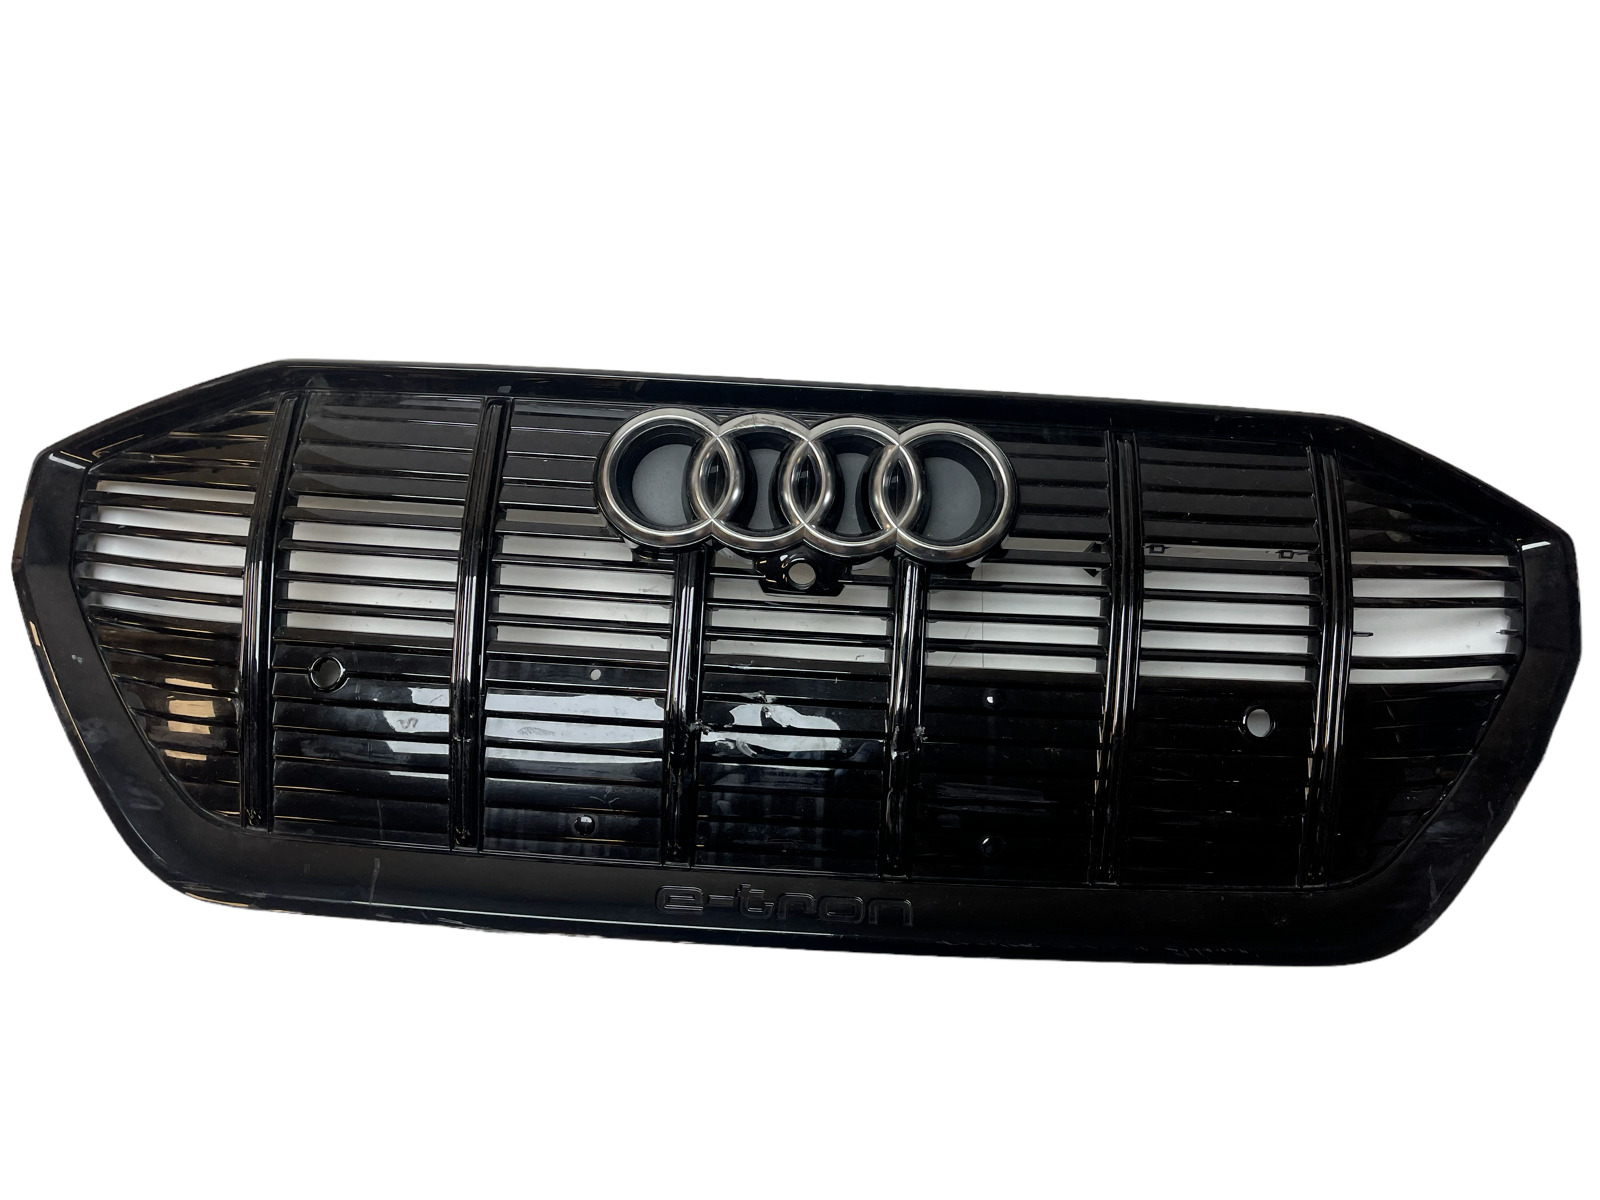 2019 2020 2021 2022 AUDI E-TRON ELECTRIC FRONT RADIATOR GRILLE OEM